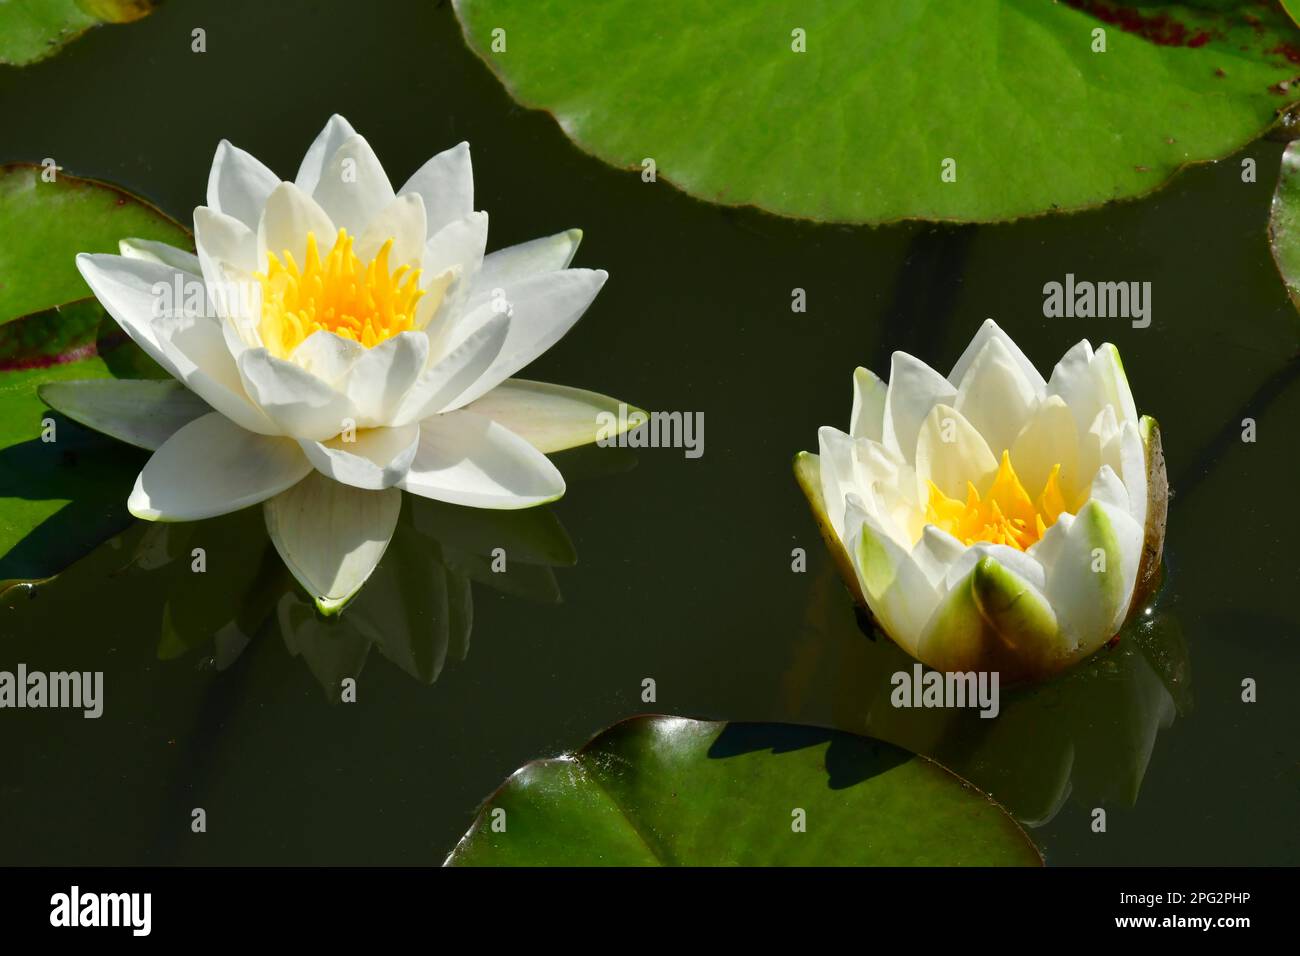 White Water Lily (Nymphaea alba). Two flowers in a pond. Germany Stock Photo